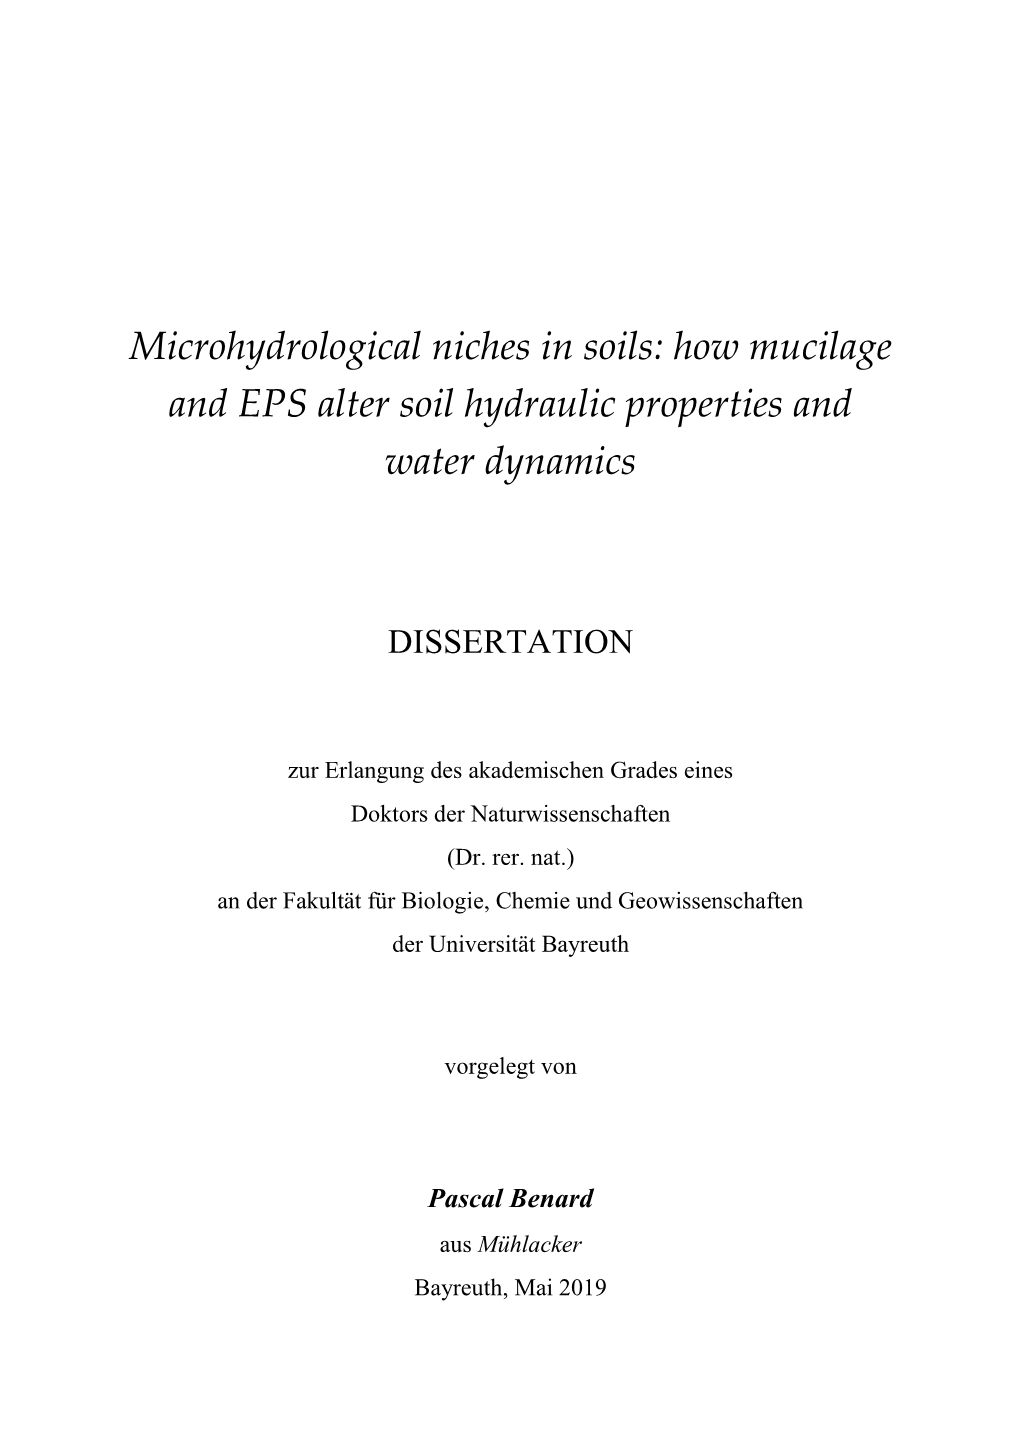 How Mucilage and EPS Alter Soil Hydraulic Properties and Water Dynamics